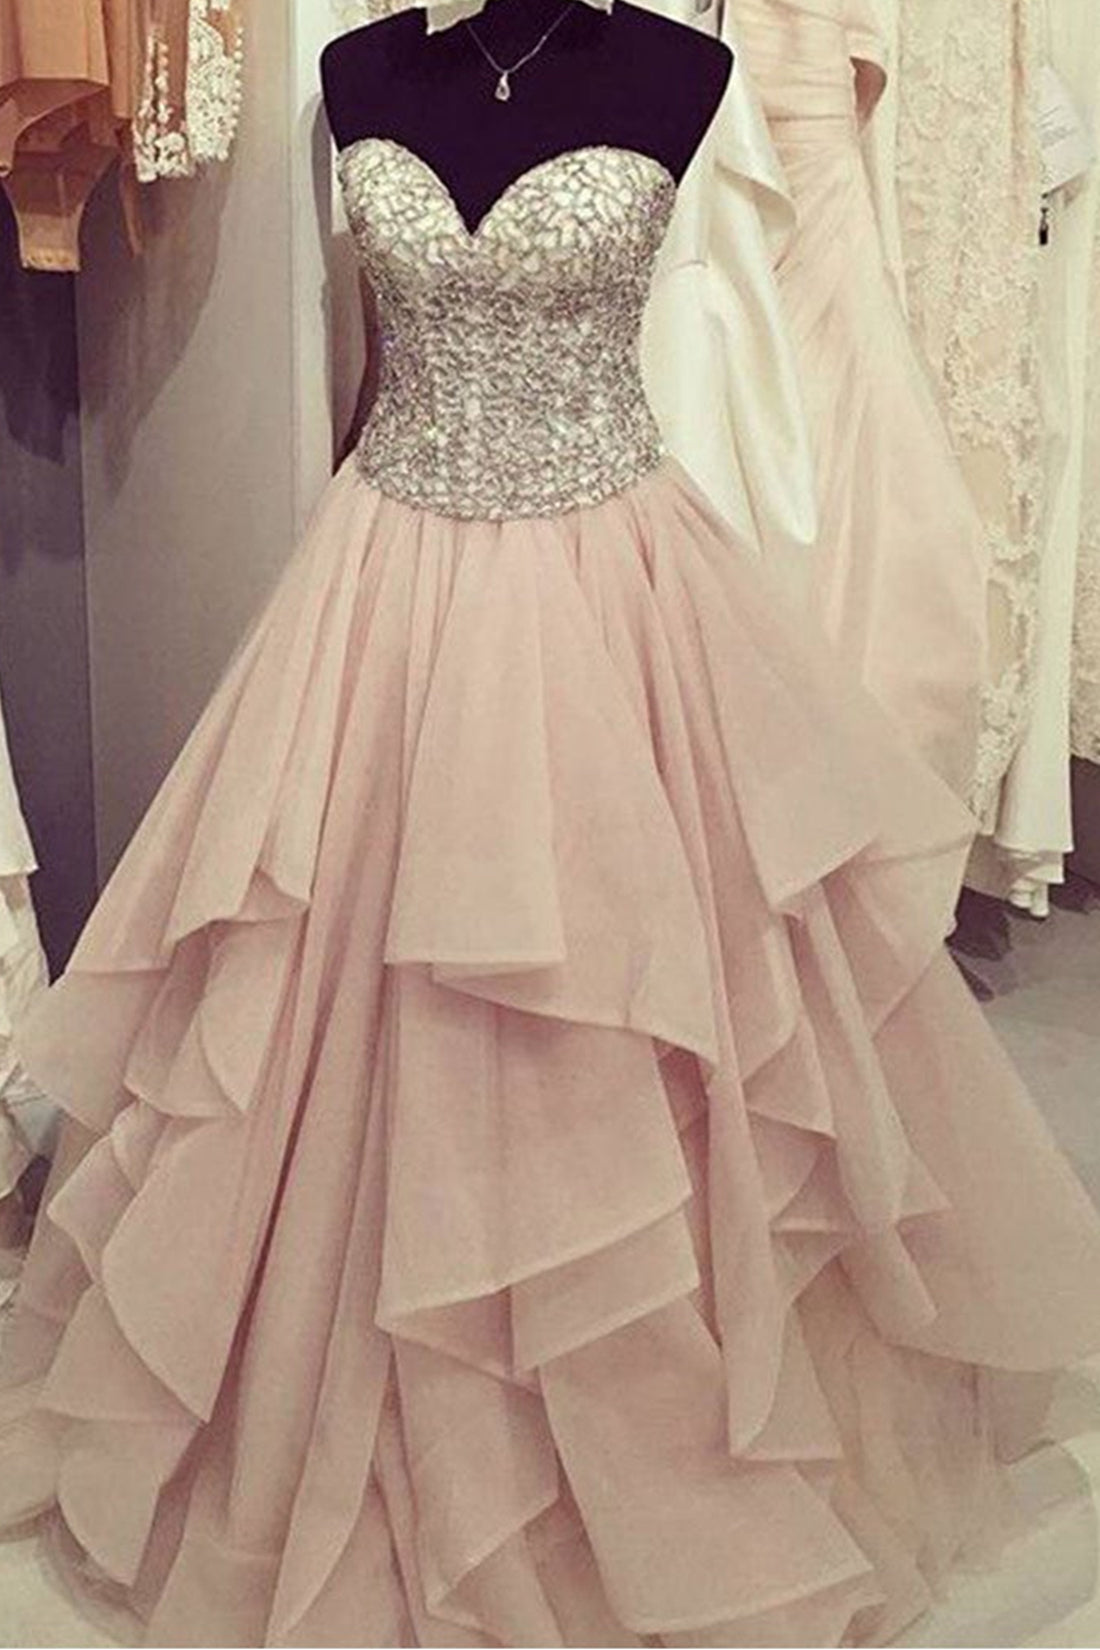 Gorgeous Sweetheart Neck Beaded Pink Tulle Long Prom Dresses, Strapless Pink Formal Evening Dresses, Beaded Pink Ball Gown